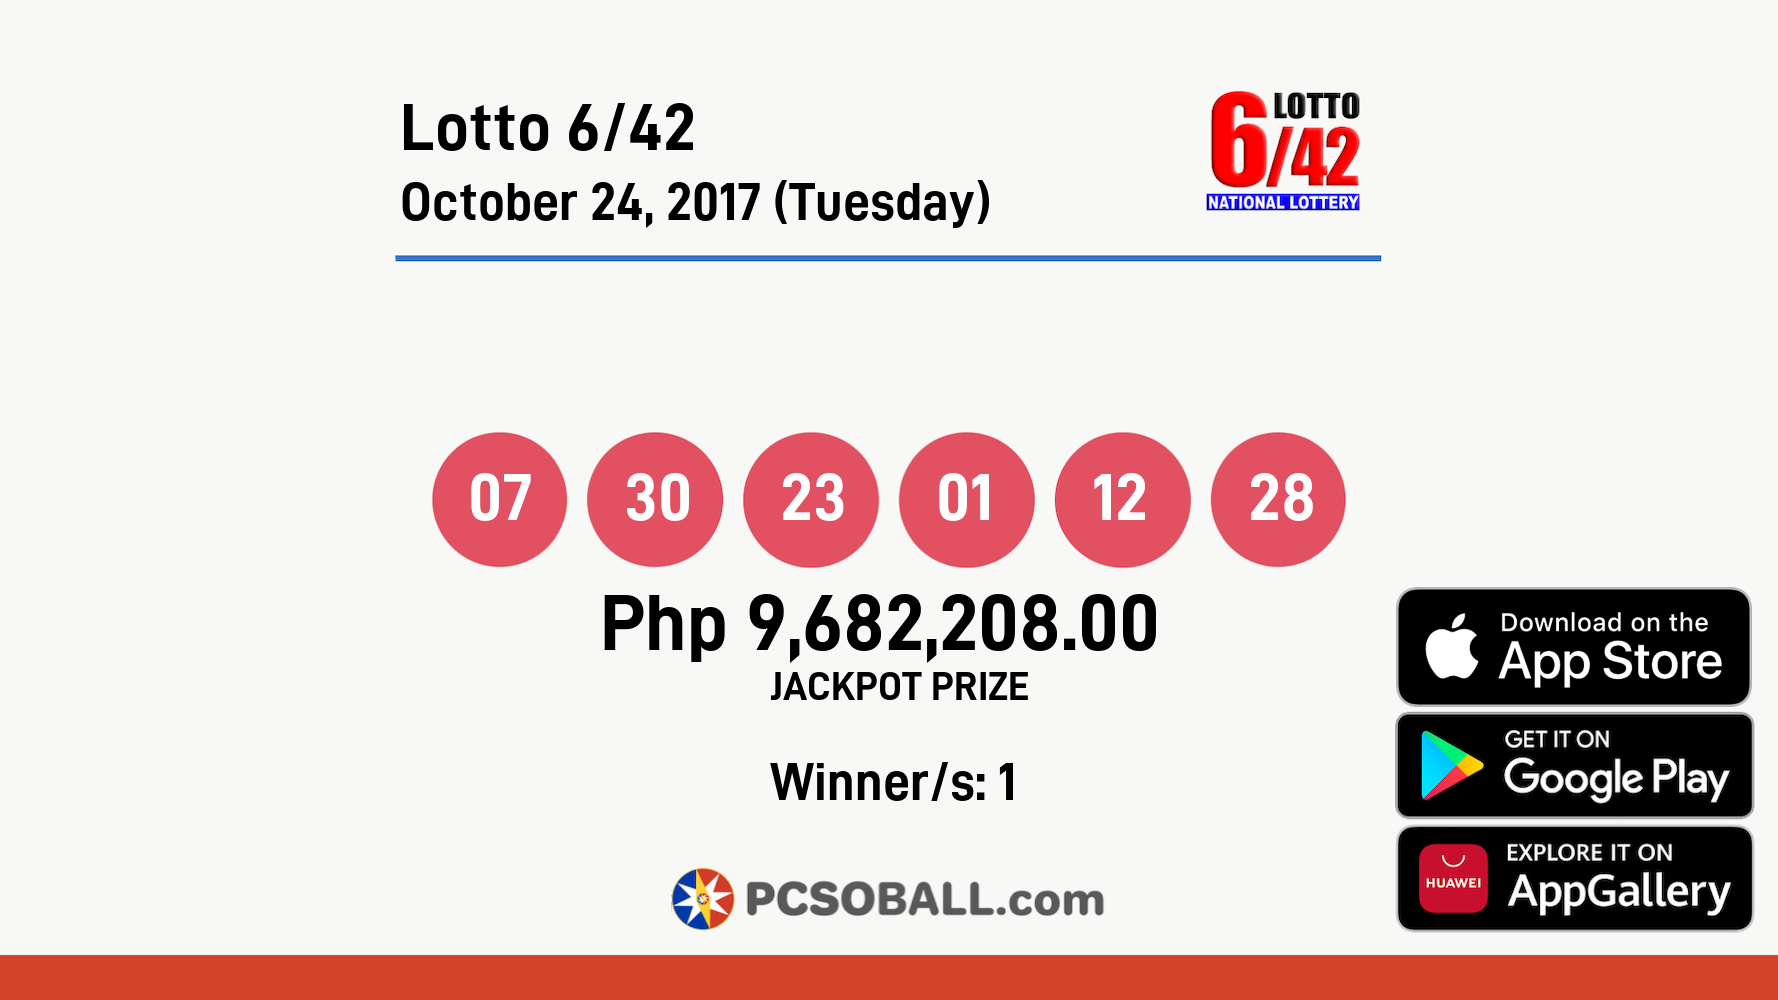 Lotto 6/42 October 24, 2017 (Tuesday) Result